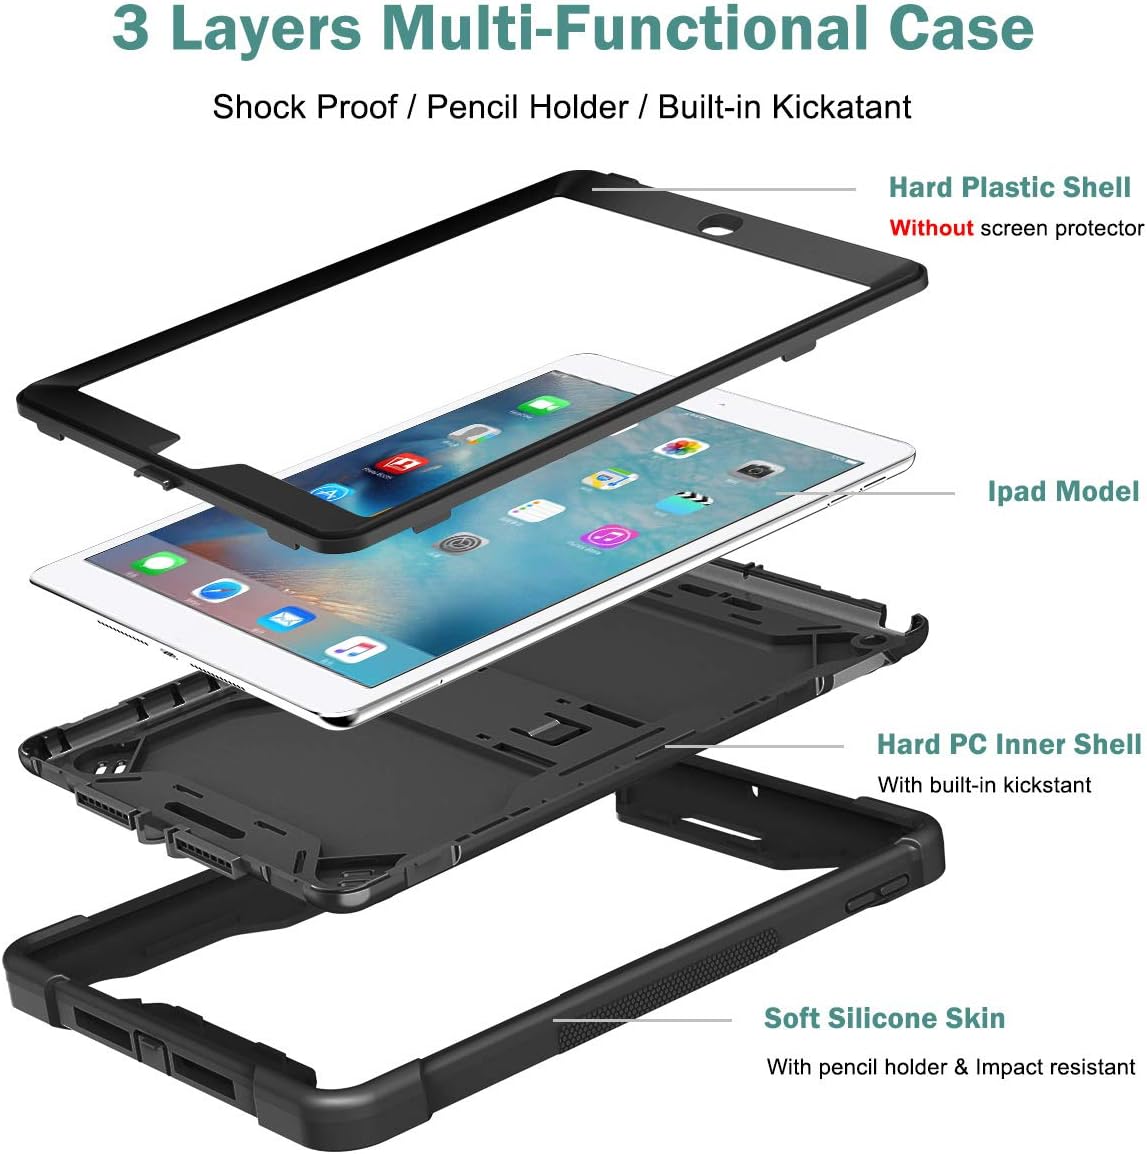 Apple iPad 7, 8 and 9 (10.2 inch) Black Shockproof Rugged Case with Kickstand *Free Shipping*